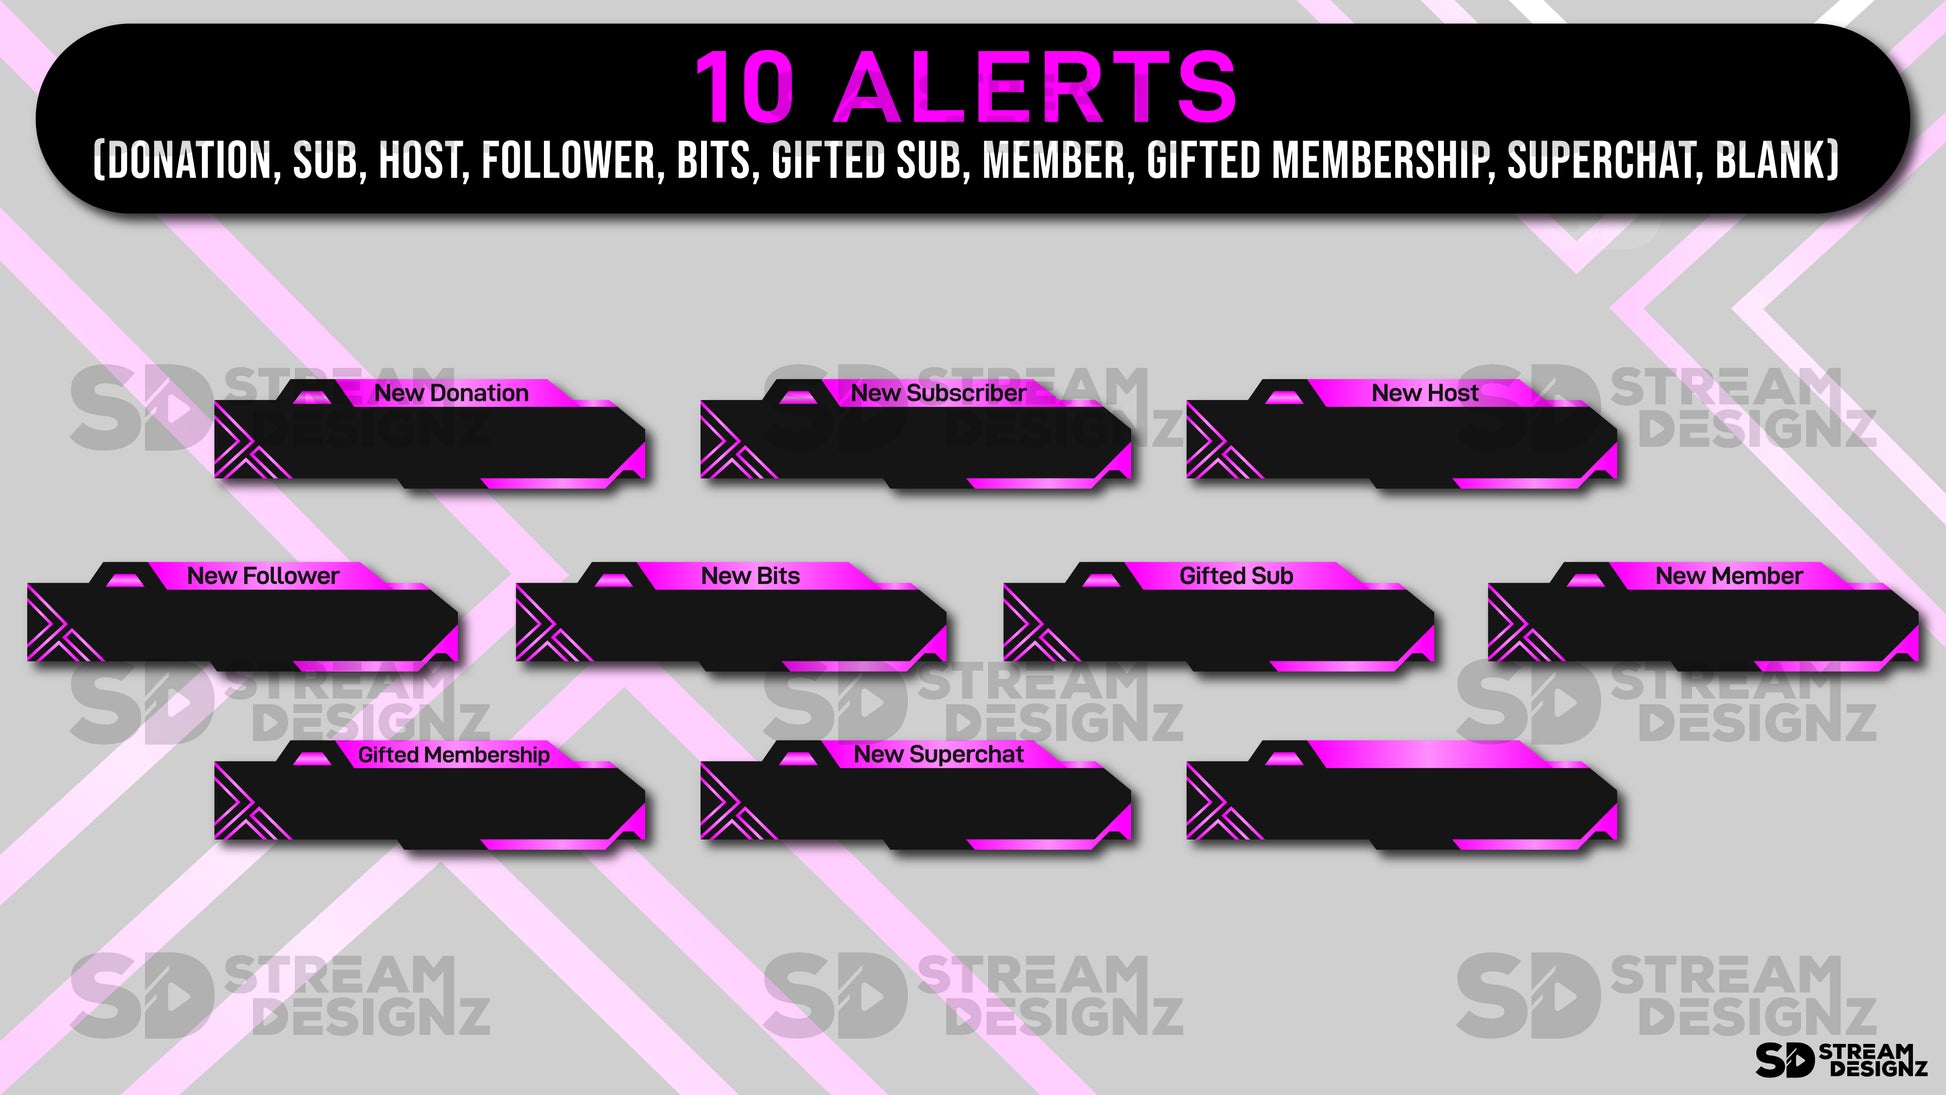 animated stream overlay package pink bliss 10 alerts stream designz